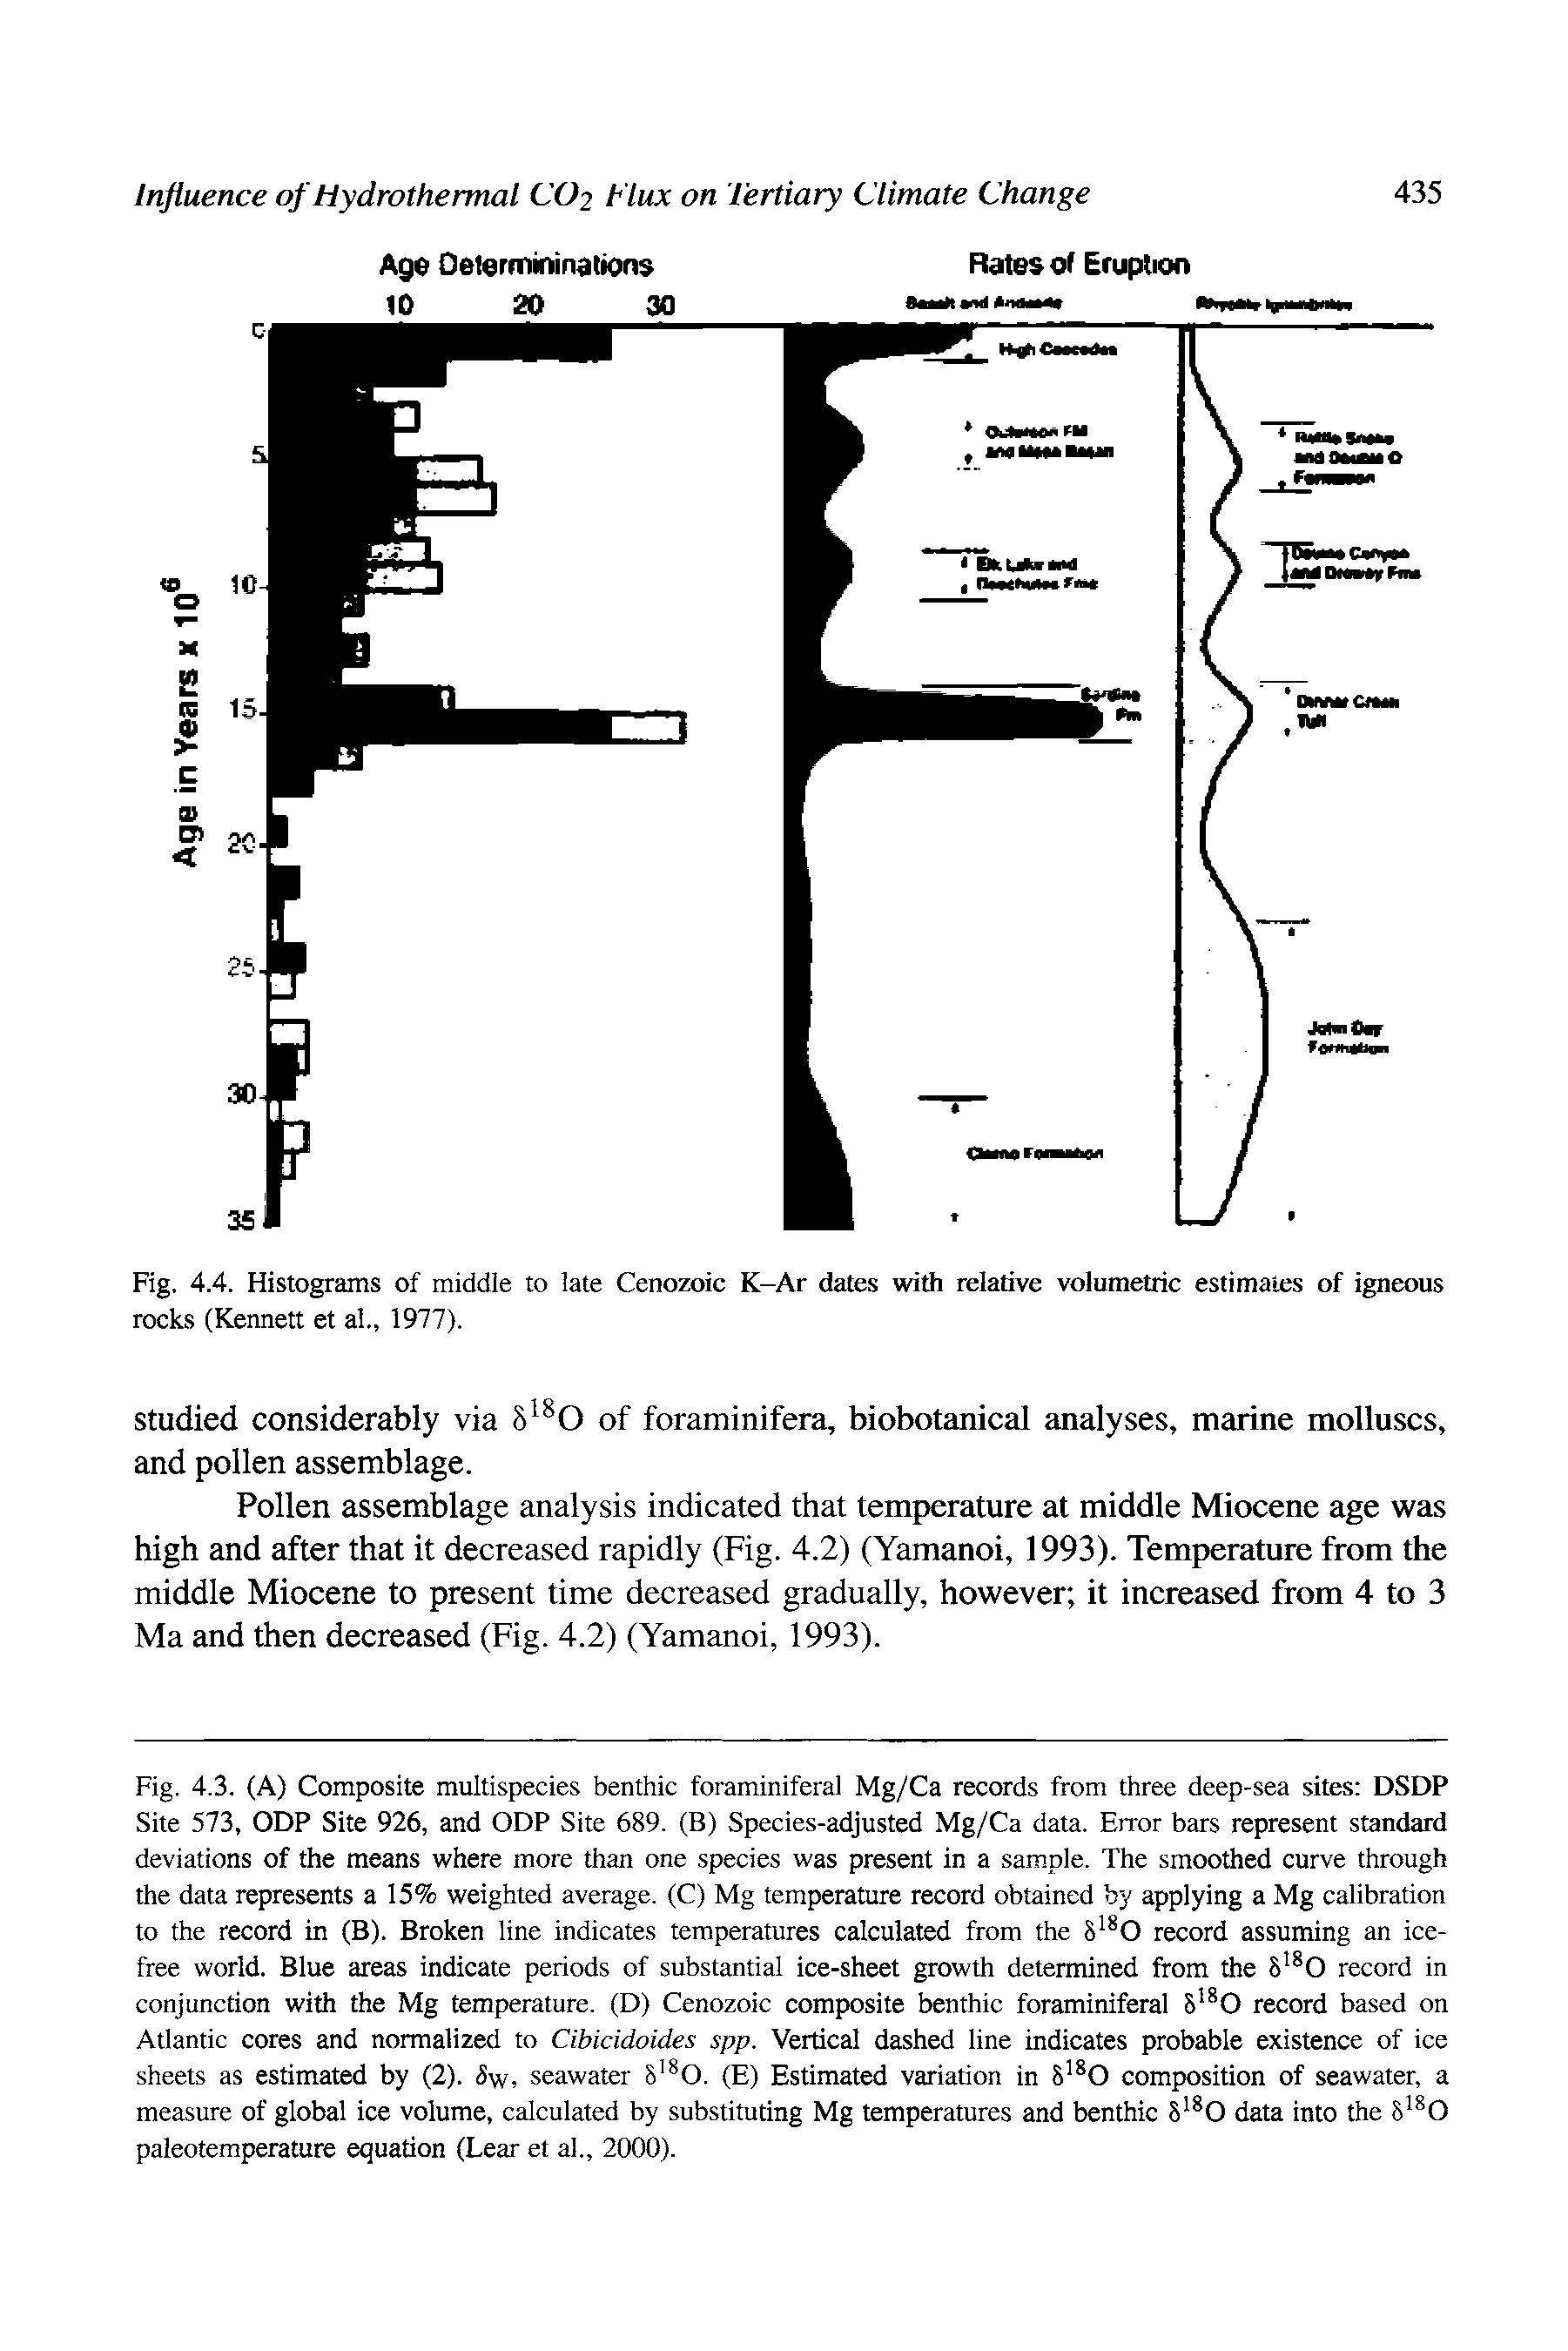 Fig. 4.4. Histograms of middle to late Cenozoic K-Ar dates with relative volumetric estimates of igneous rocks (Kennett et al., 1977).